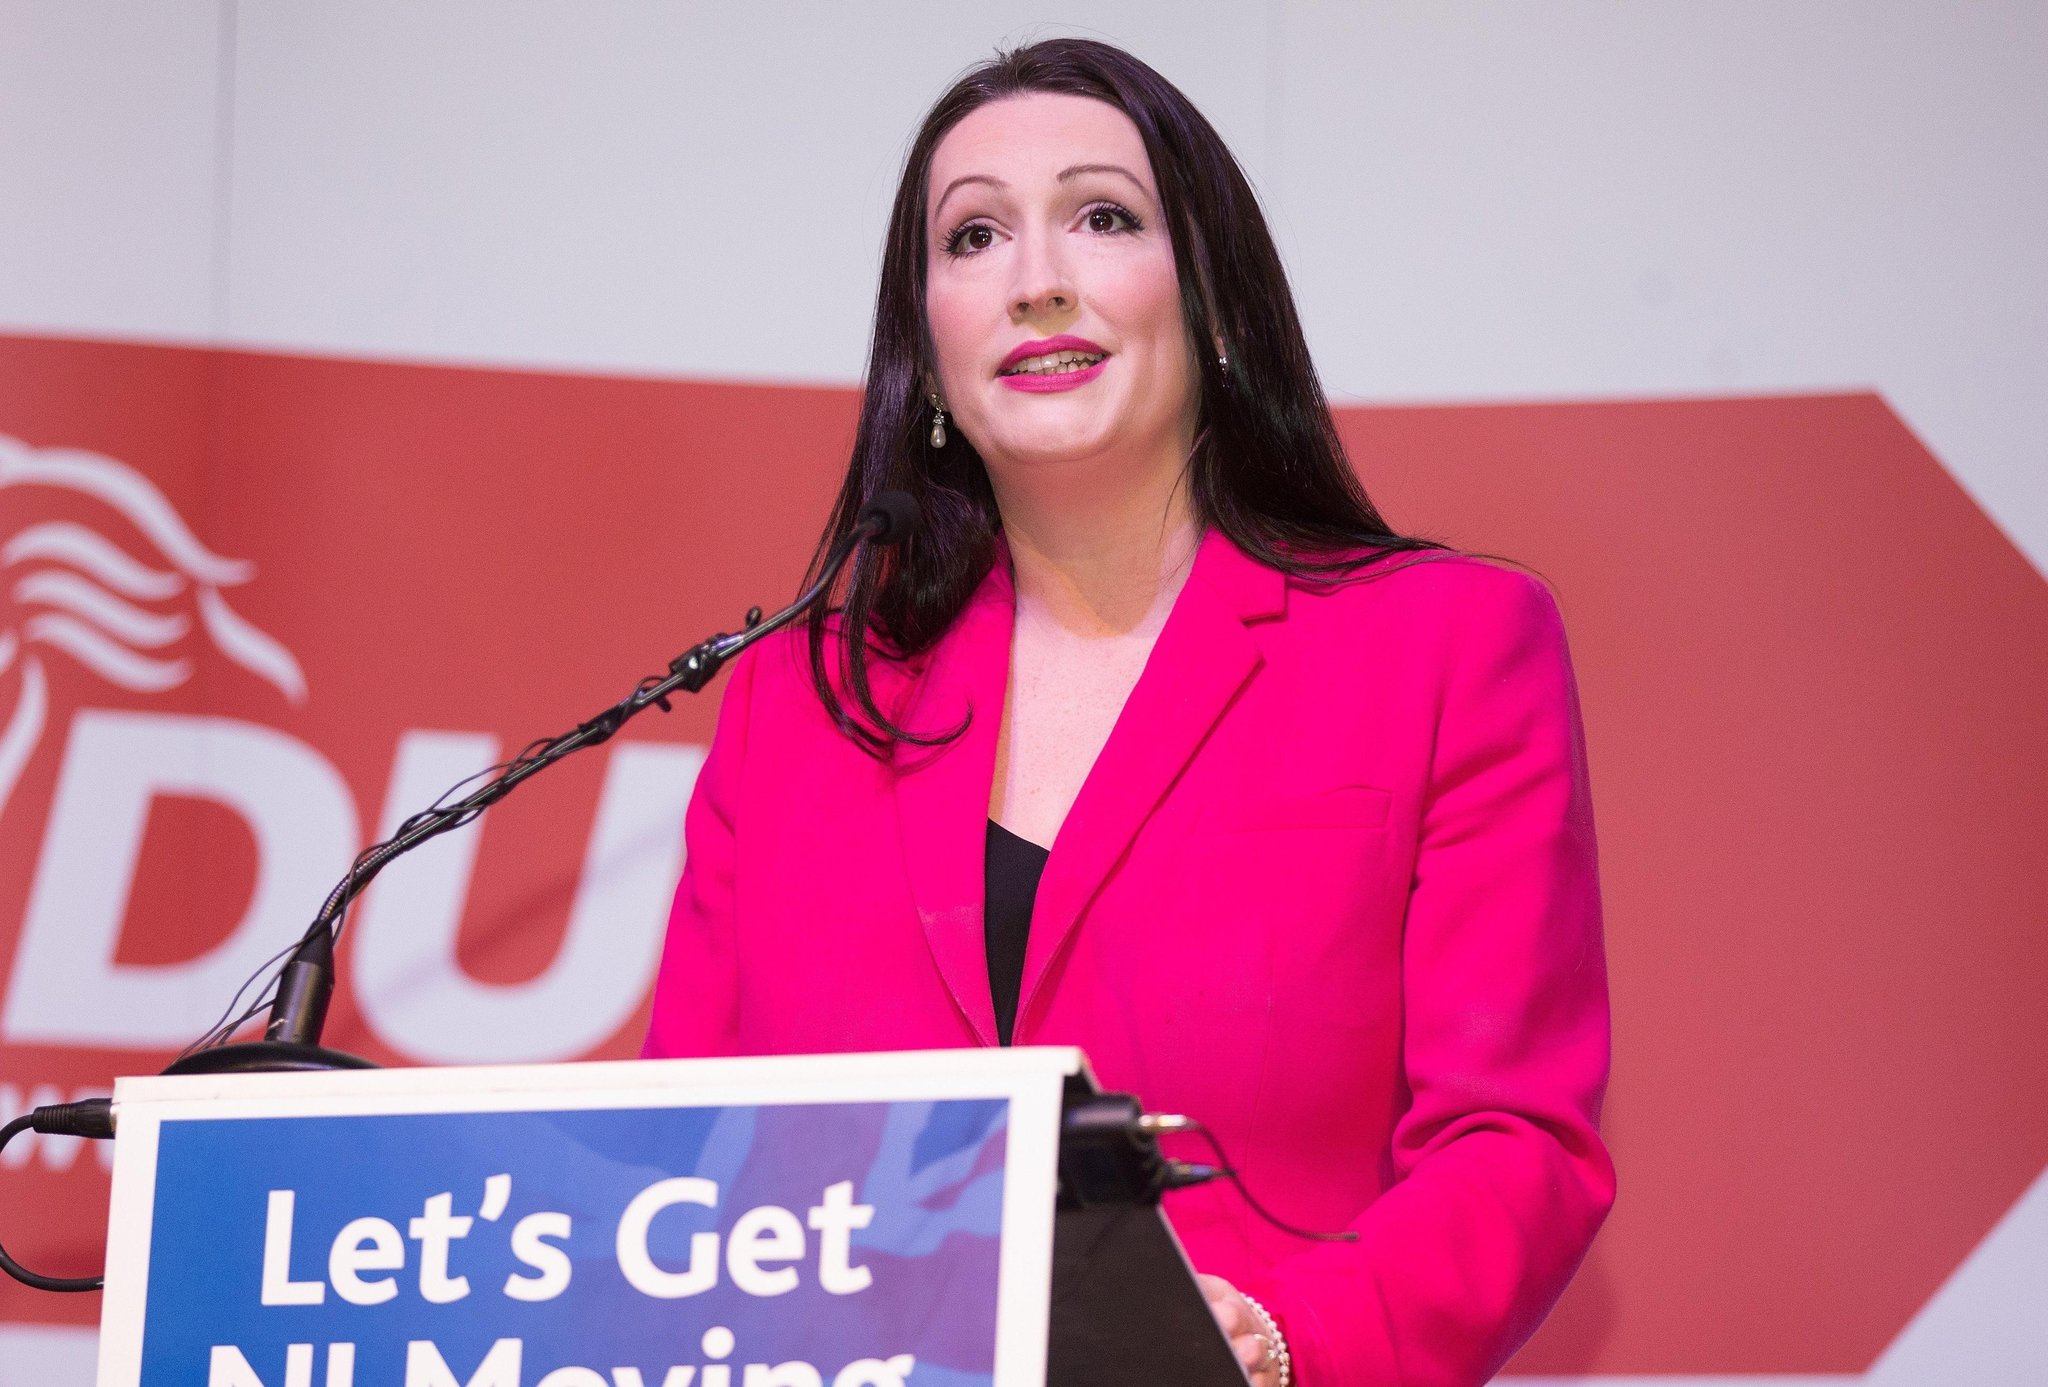 DUP's Emma Little Pengelly co-opted as MLA for Lagan Valley